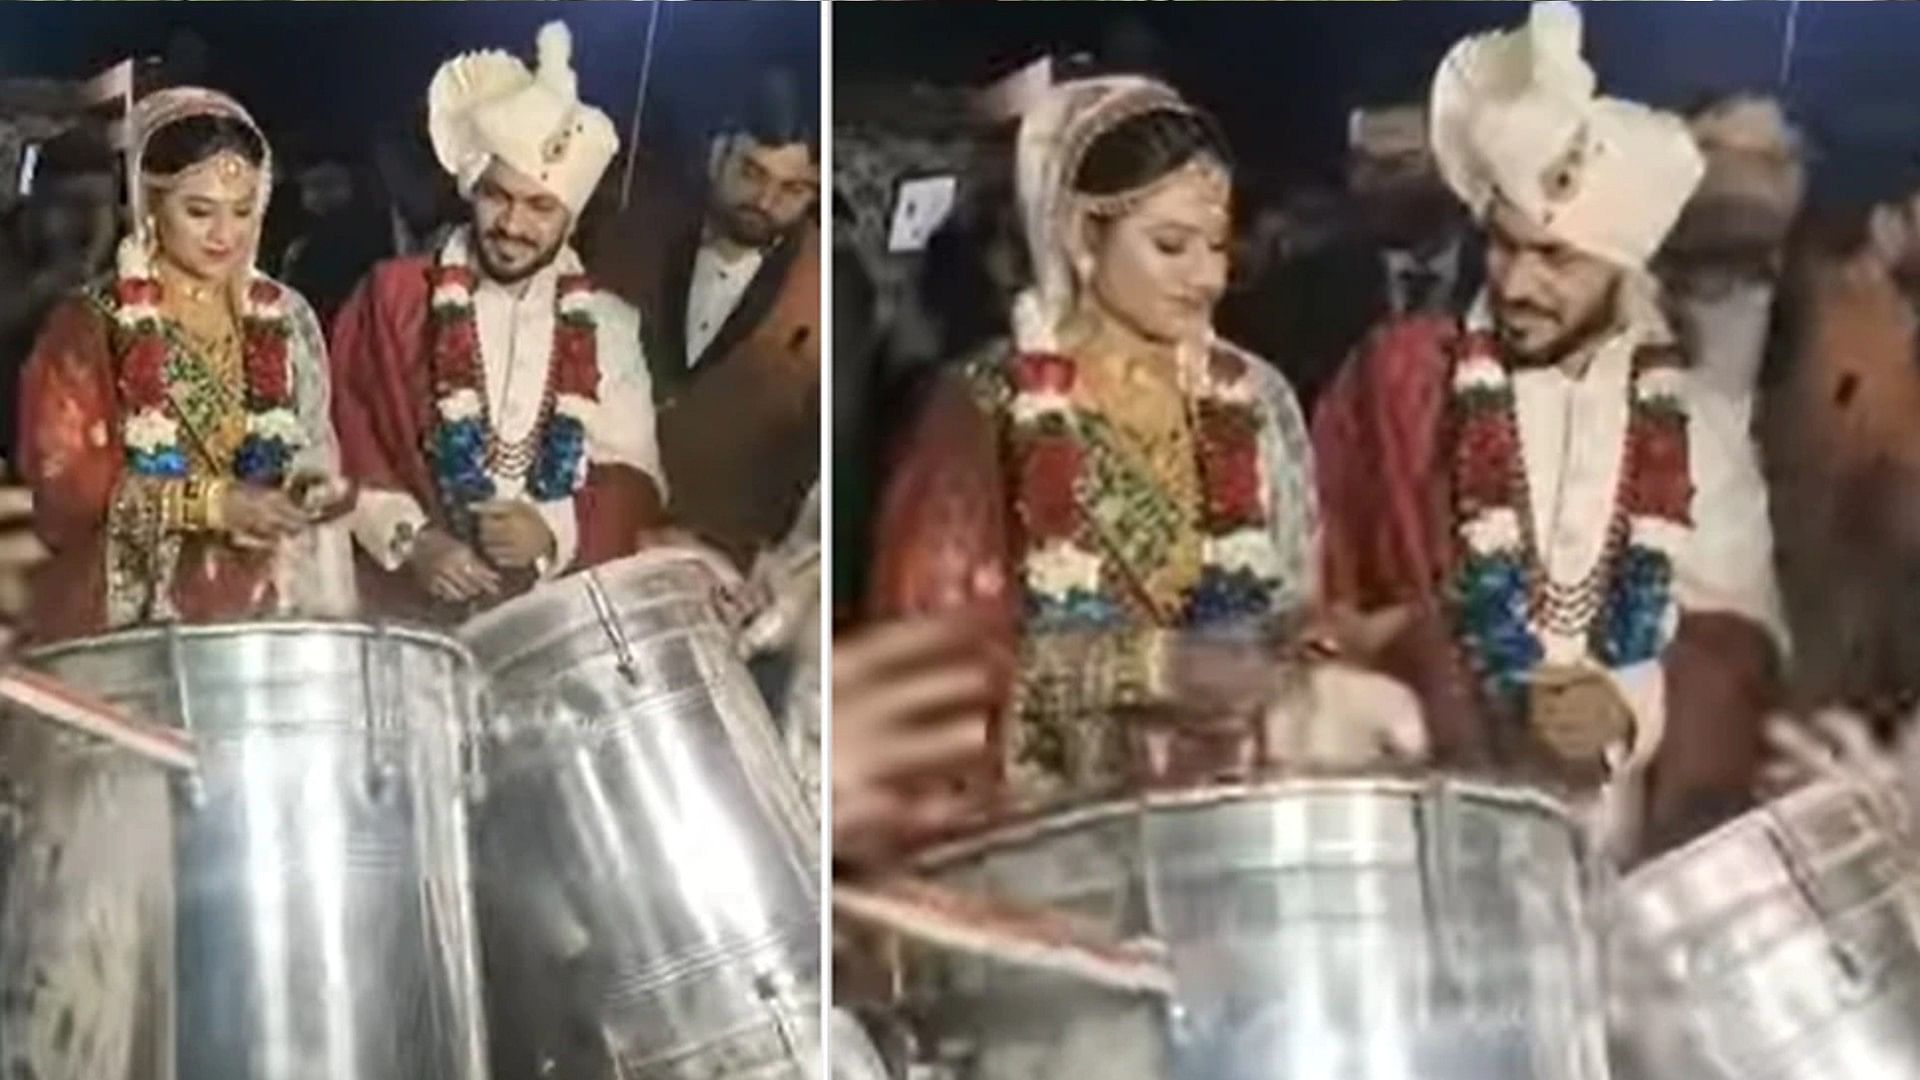 Wedding Video the bride blew notes fiercely at her wedding the groom made such a gesture